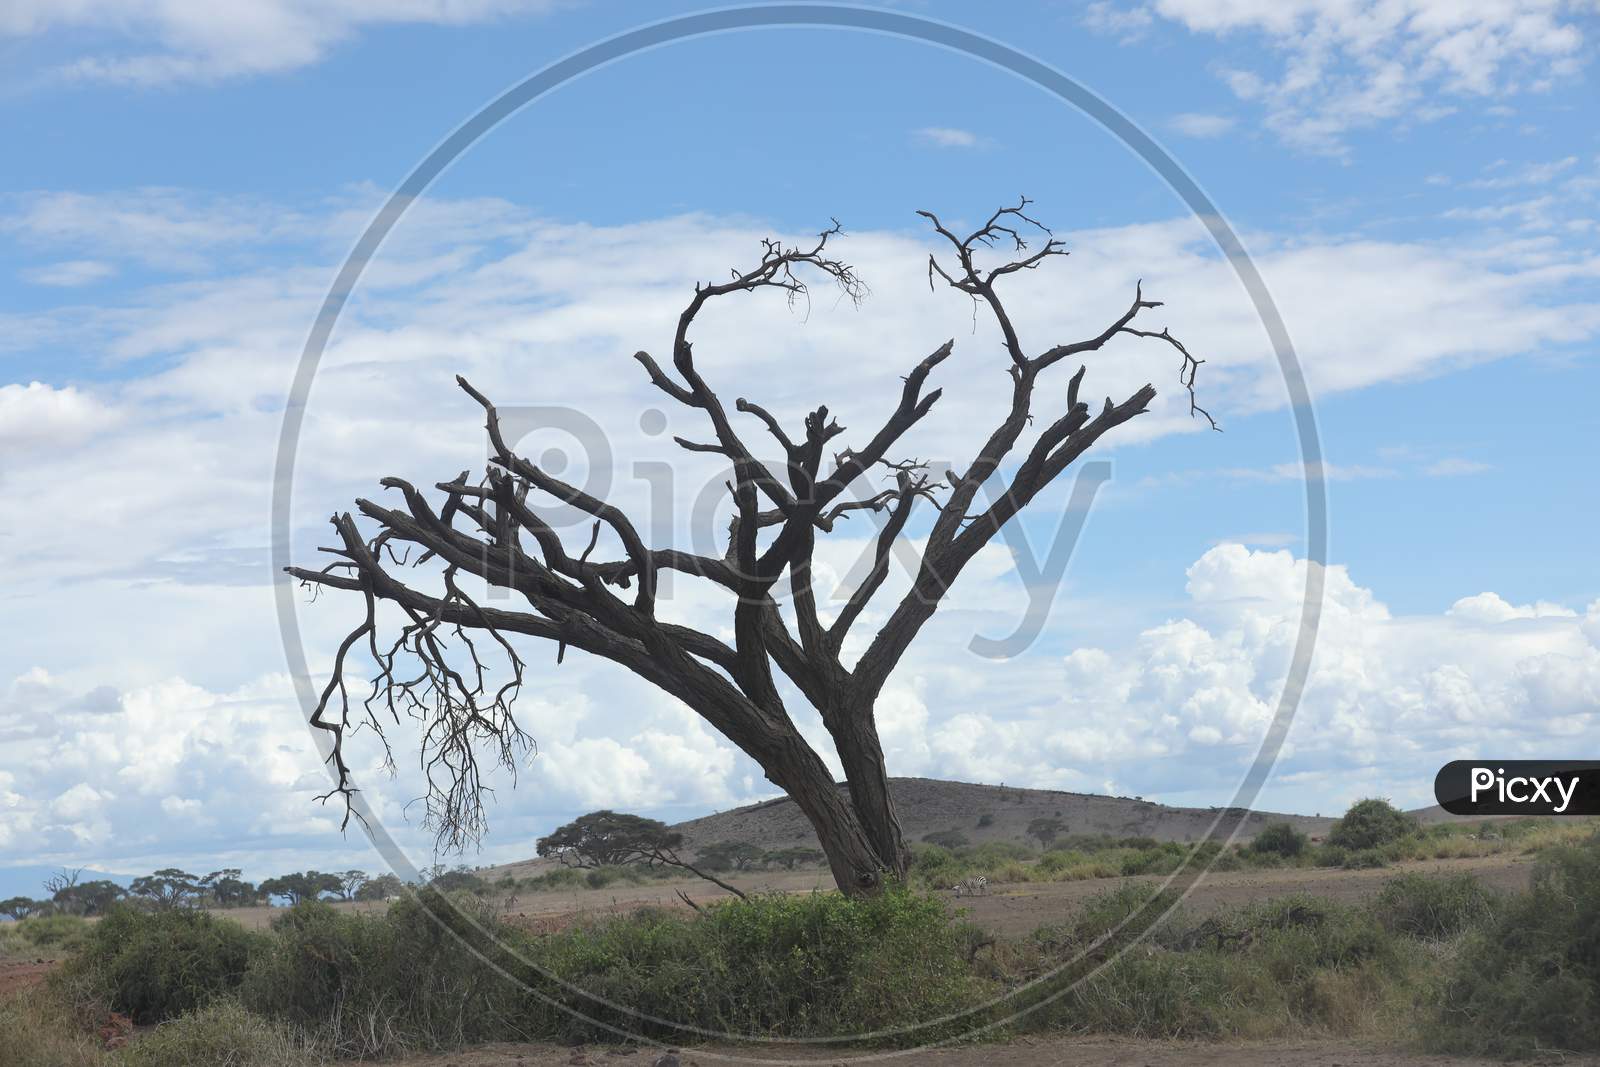 A Dried tree in the empty land of Kenya